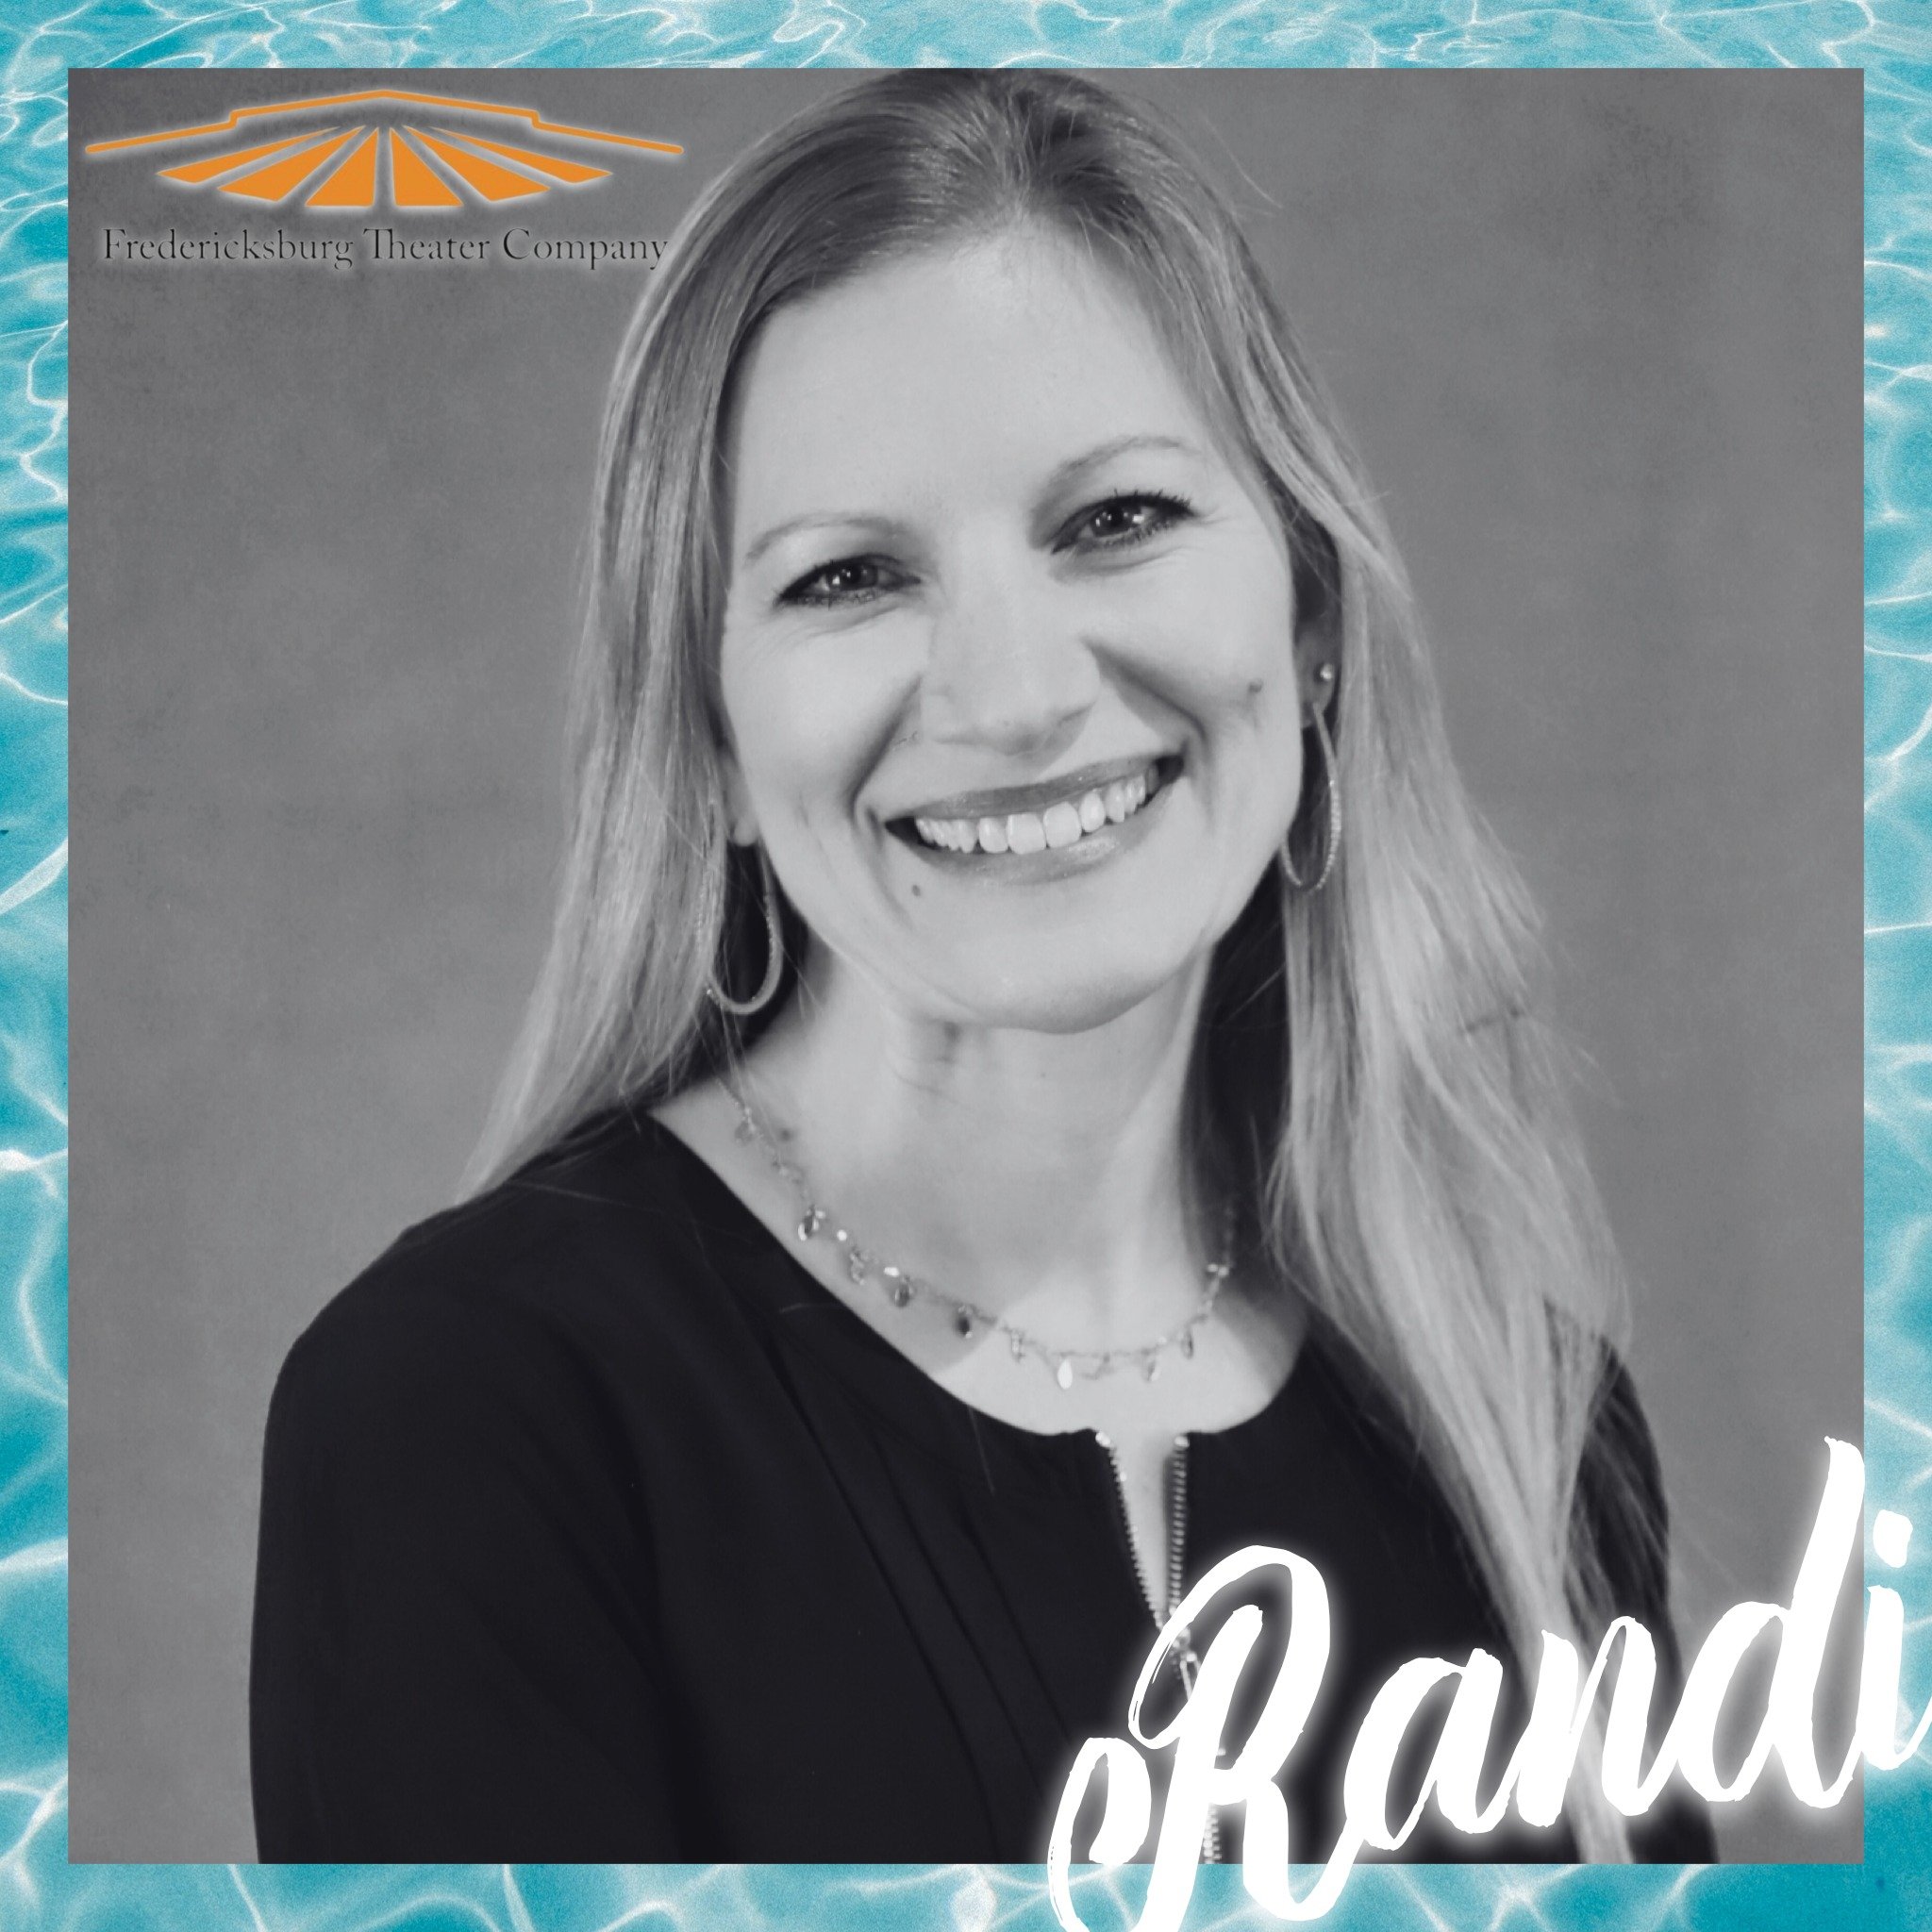 Meet Randi! She&rsquo;s the fearless director of FTC&rsquo;s upcoming presentation of #TheSweetDelilahSwimClub! 🏖️⚓️🏊&zwj;♀️🎭
By now you've heard that friendship is the main theme of this show, and Randi couldn't agree more. &quot;Relationships ar